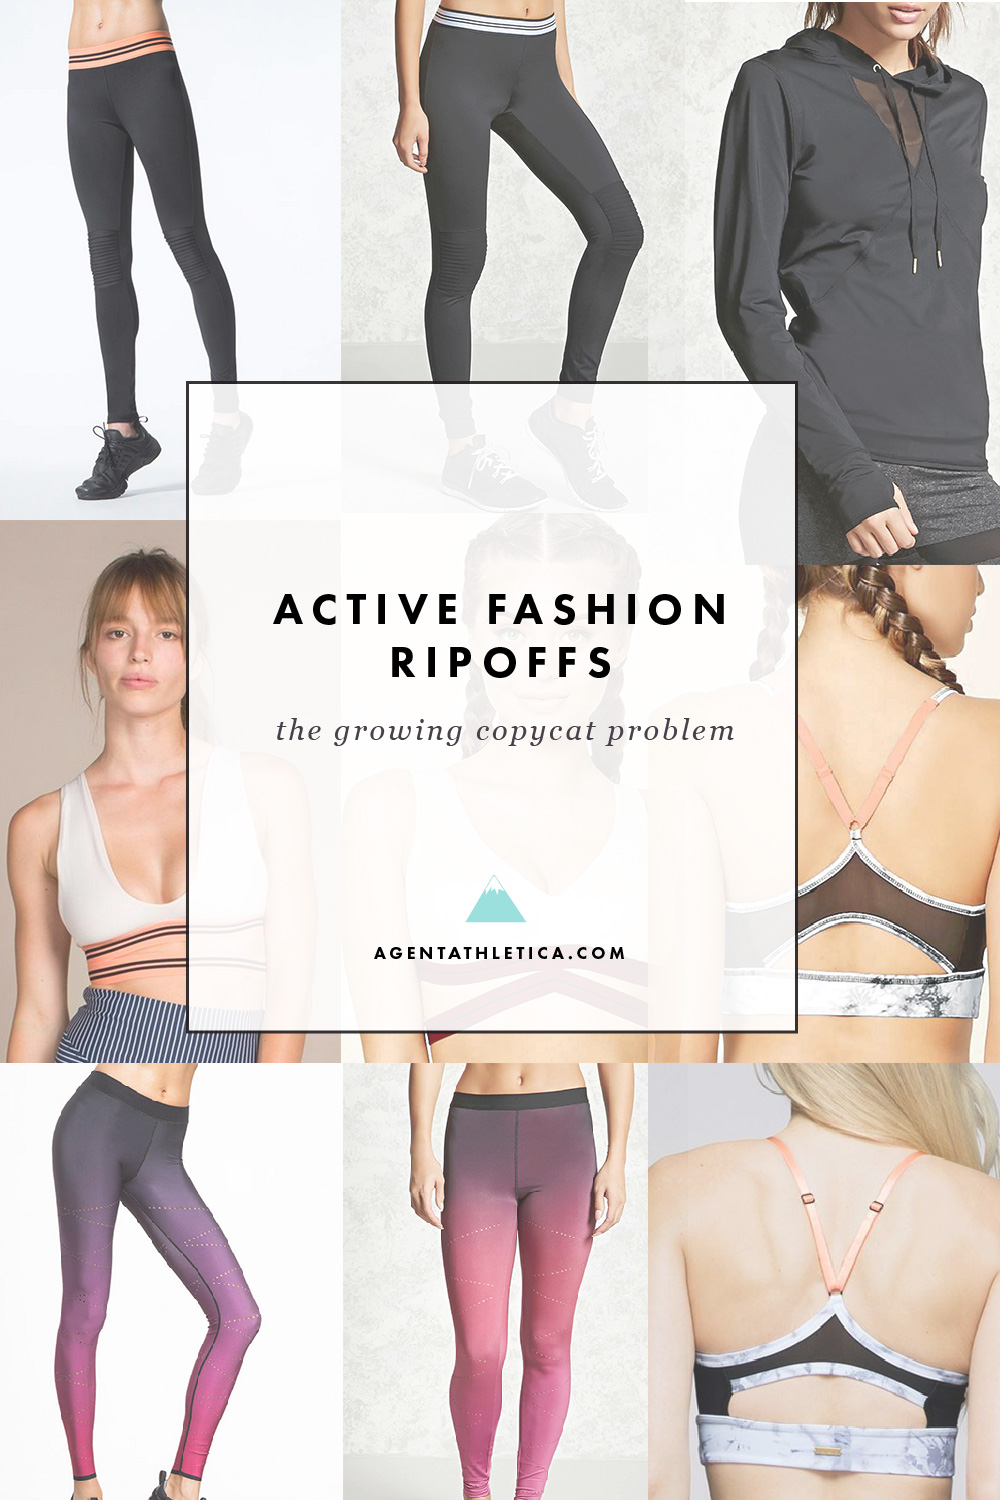 Fabletics Activewear Outfit $25 Shipped - My Frugal Adventures